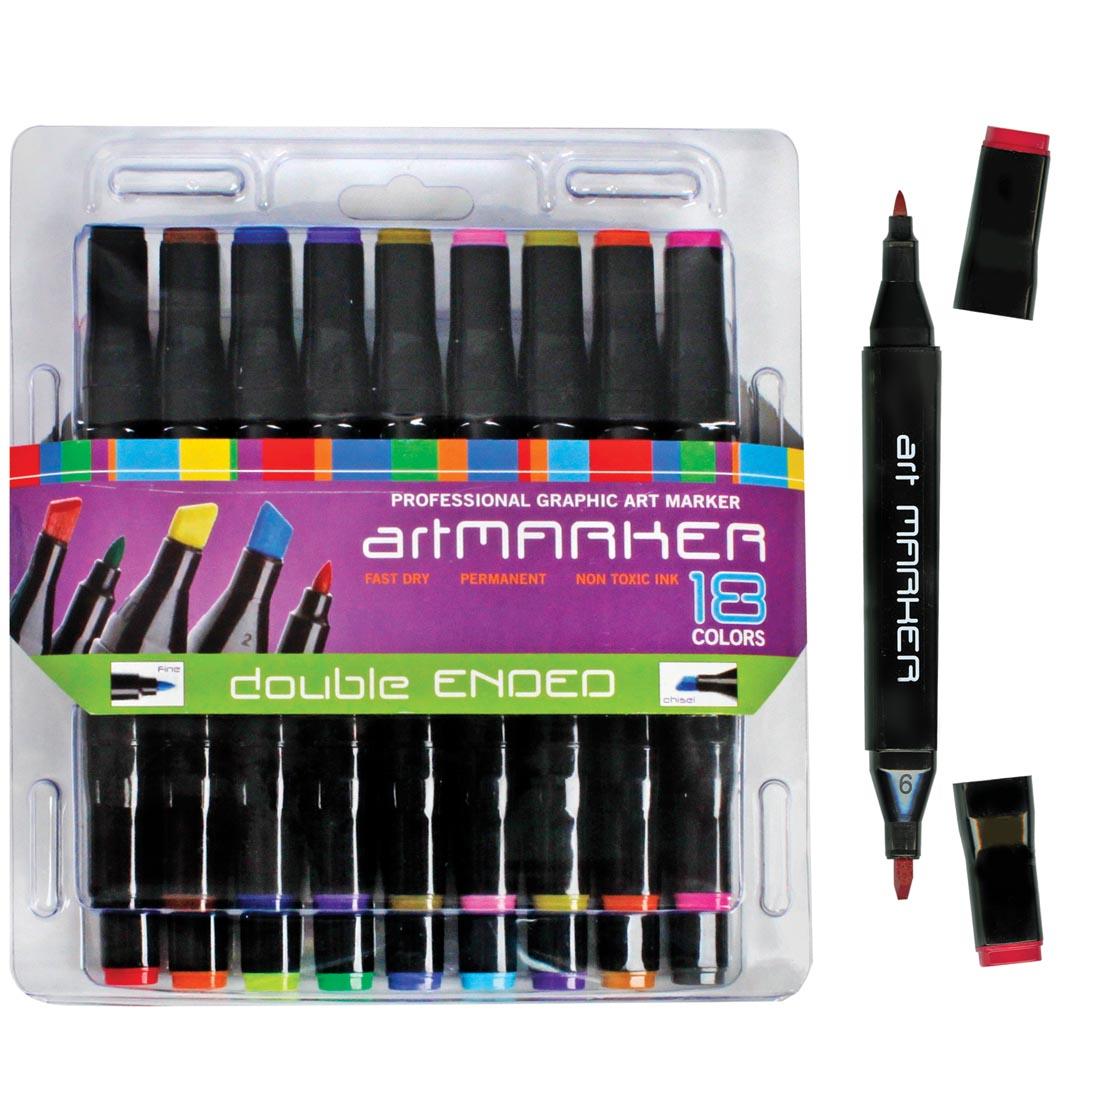 ProArt Graphic Art Marker Set Package beside single marker with both caps off